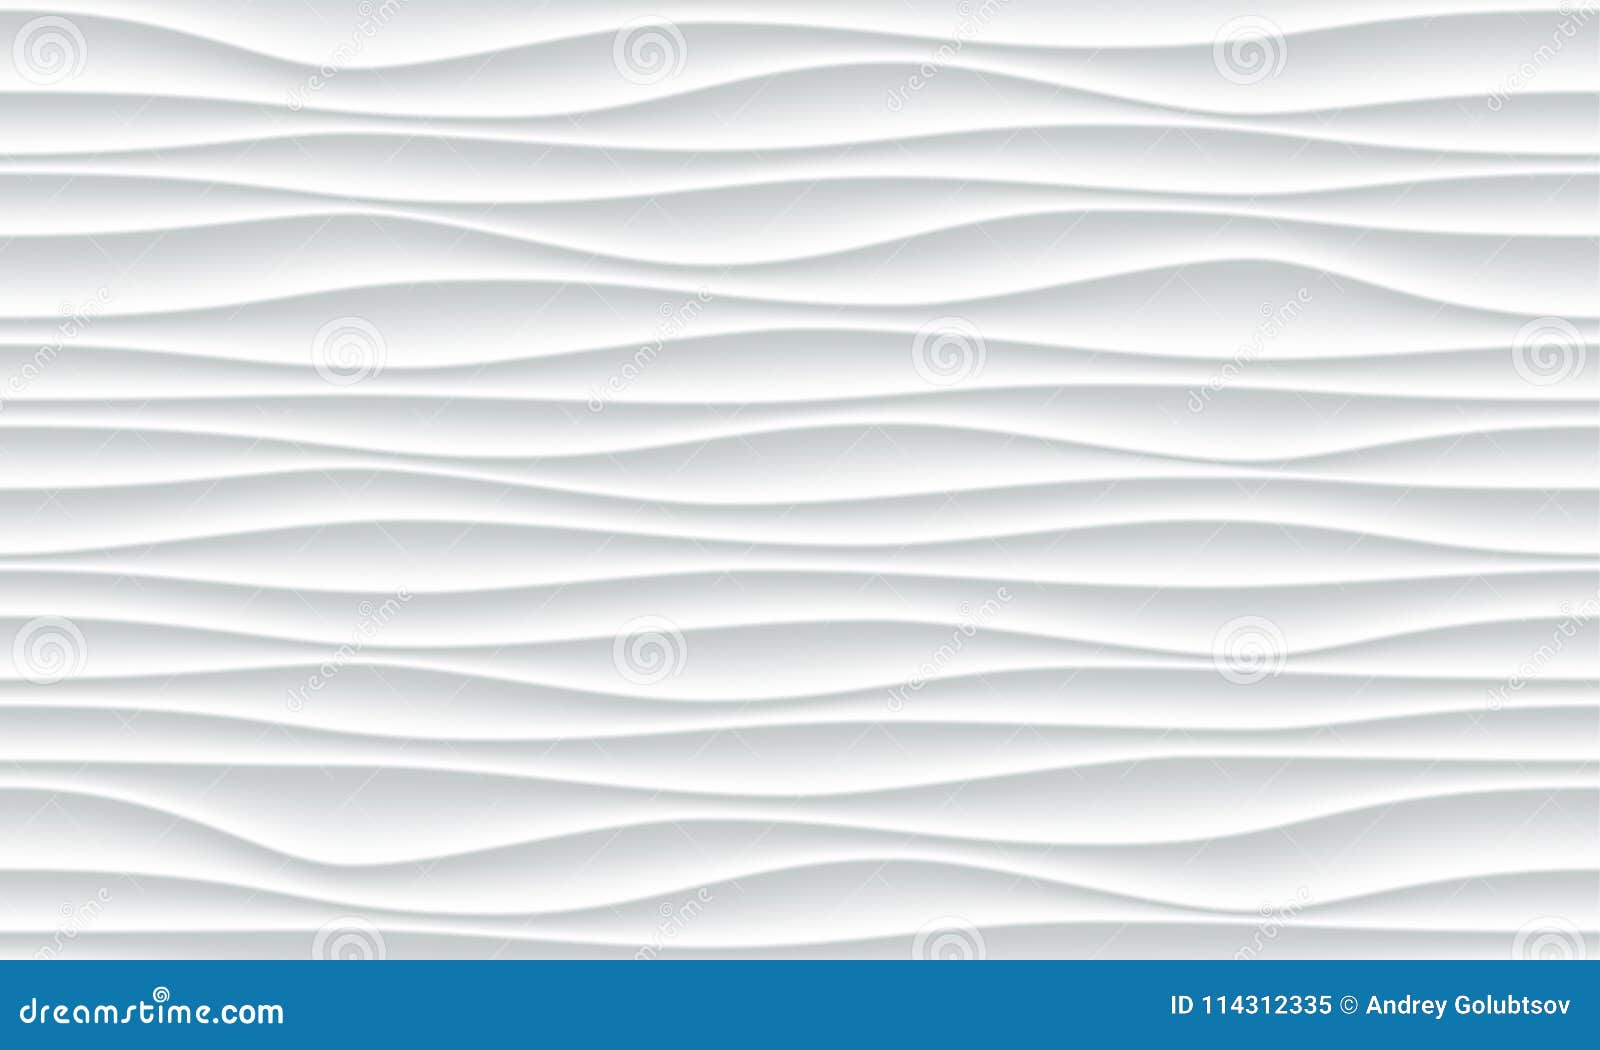 white wave pattern  abstract 3d background